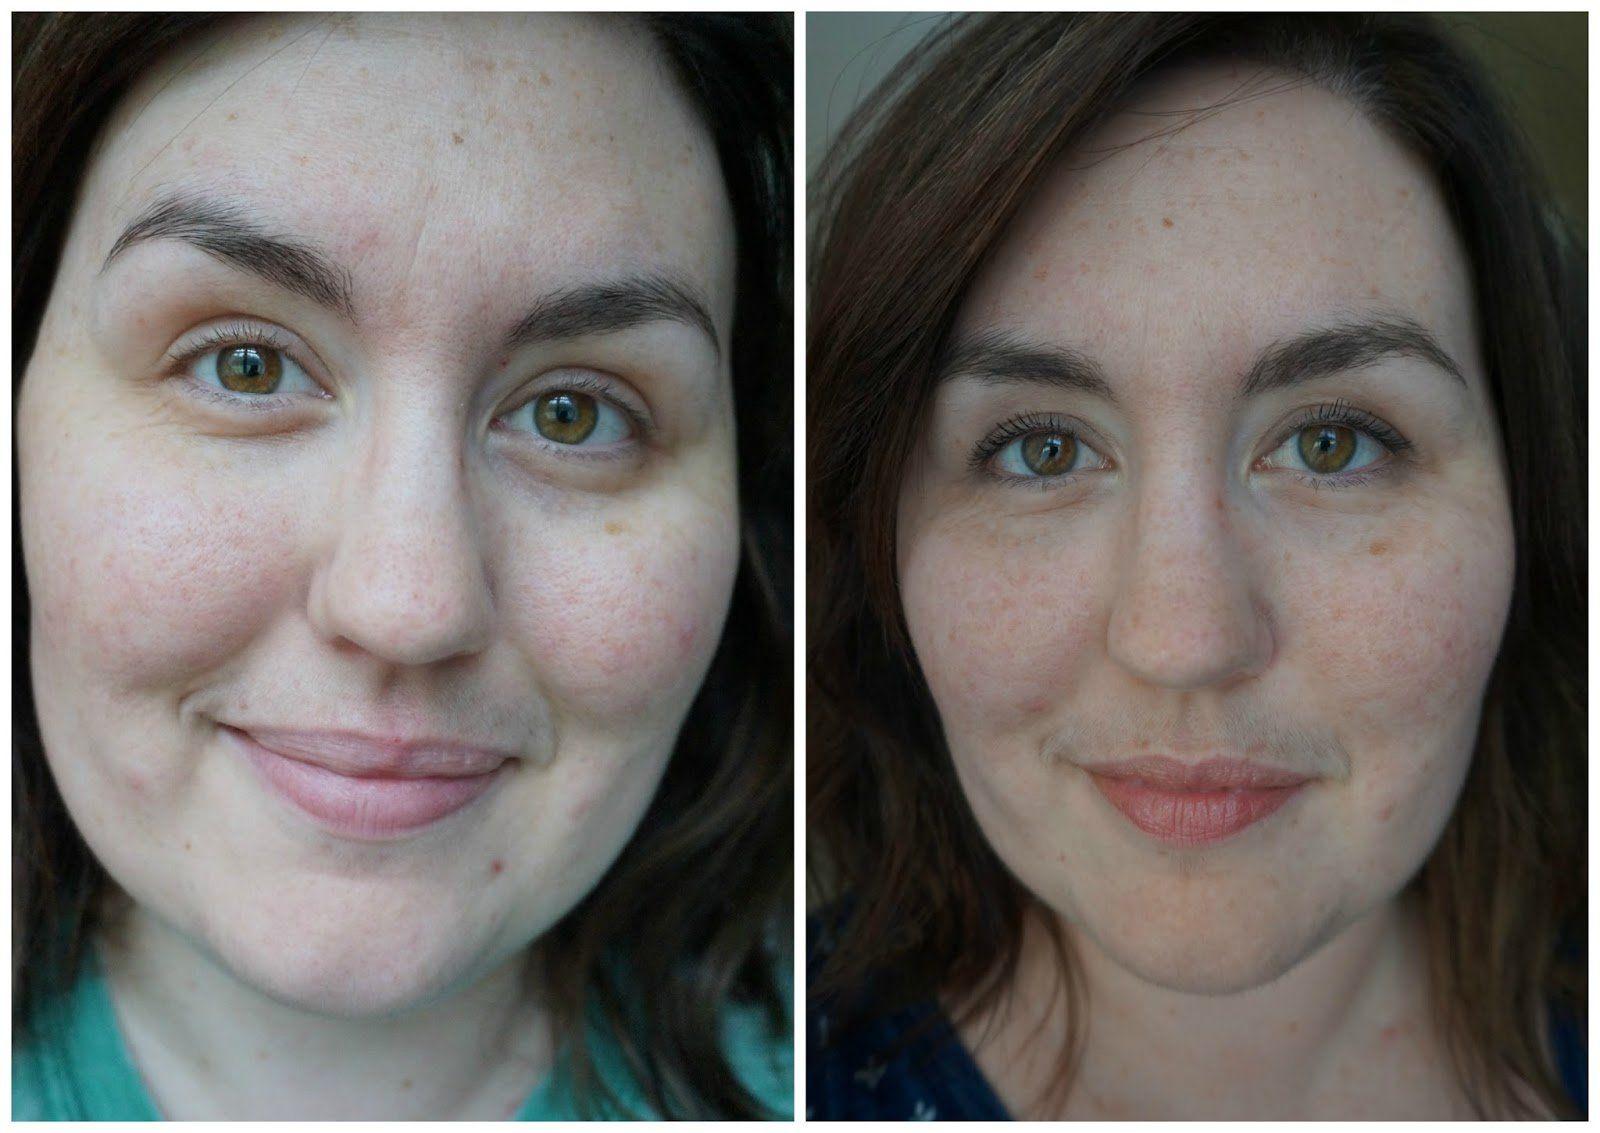 Facial link suggest toning